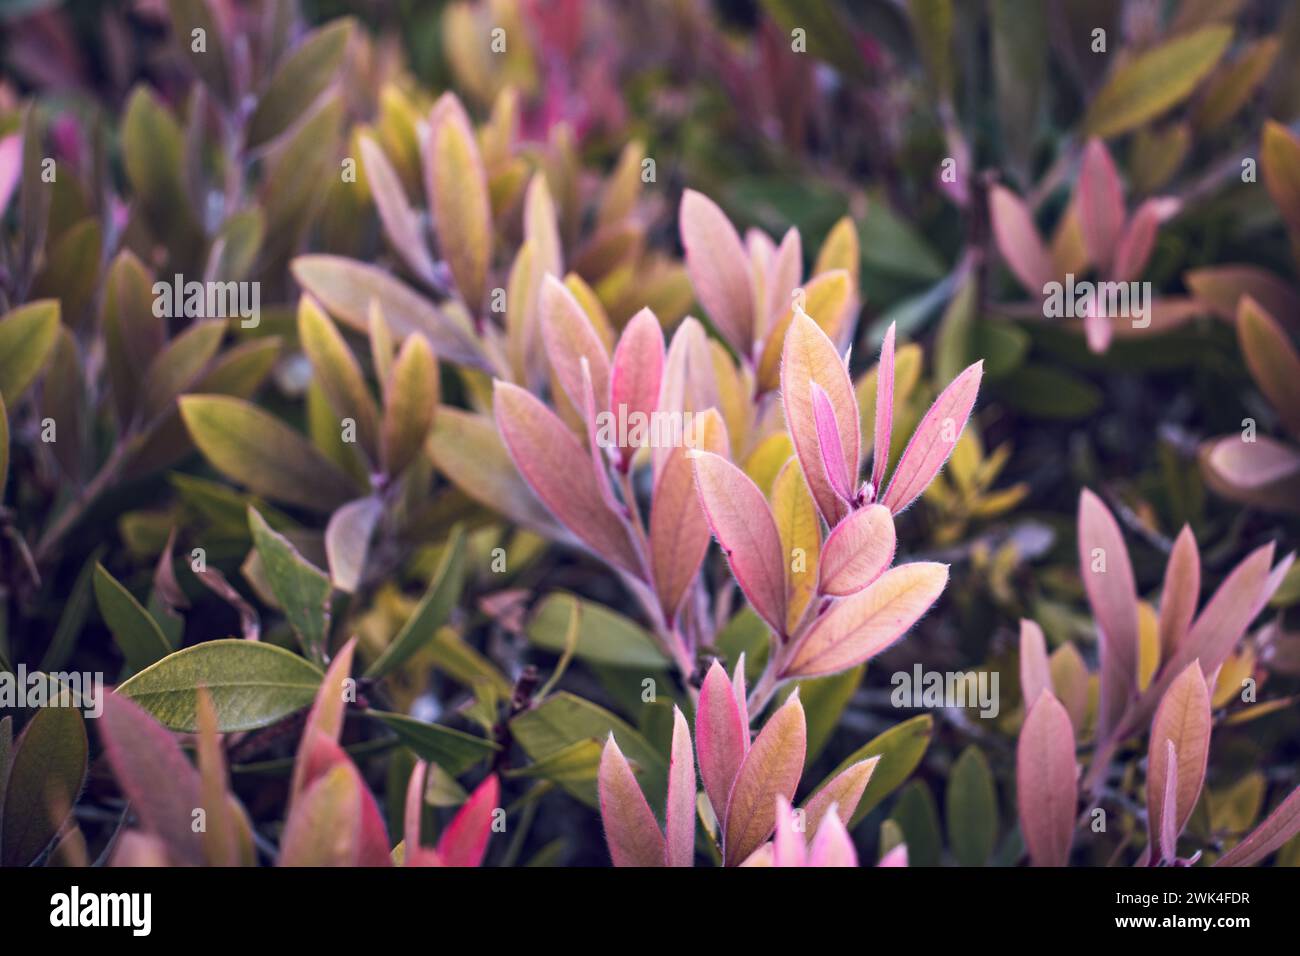 Close up pink leaves on branch in autumn photo. Colorful bush in the garden concept photography. Countryside at autumn season. Garden blossom morning. Stock Photo